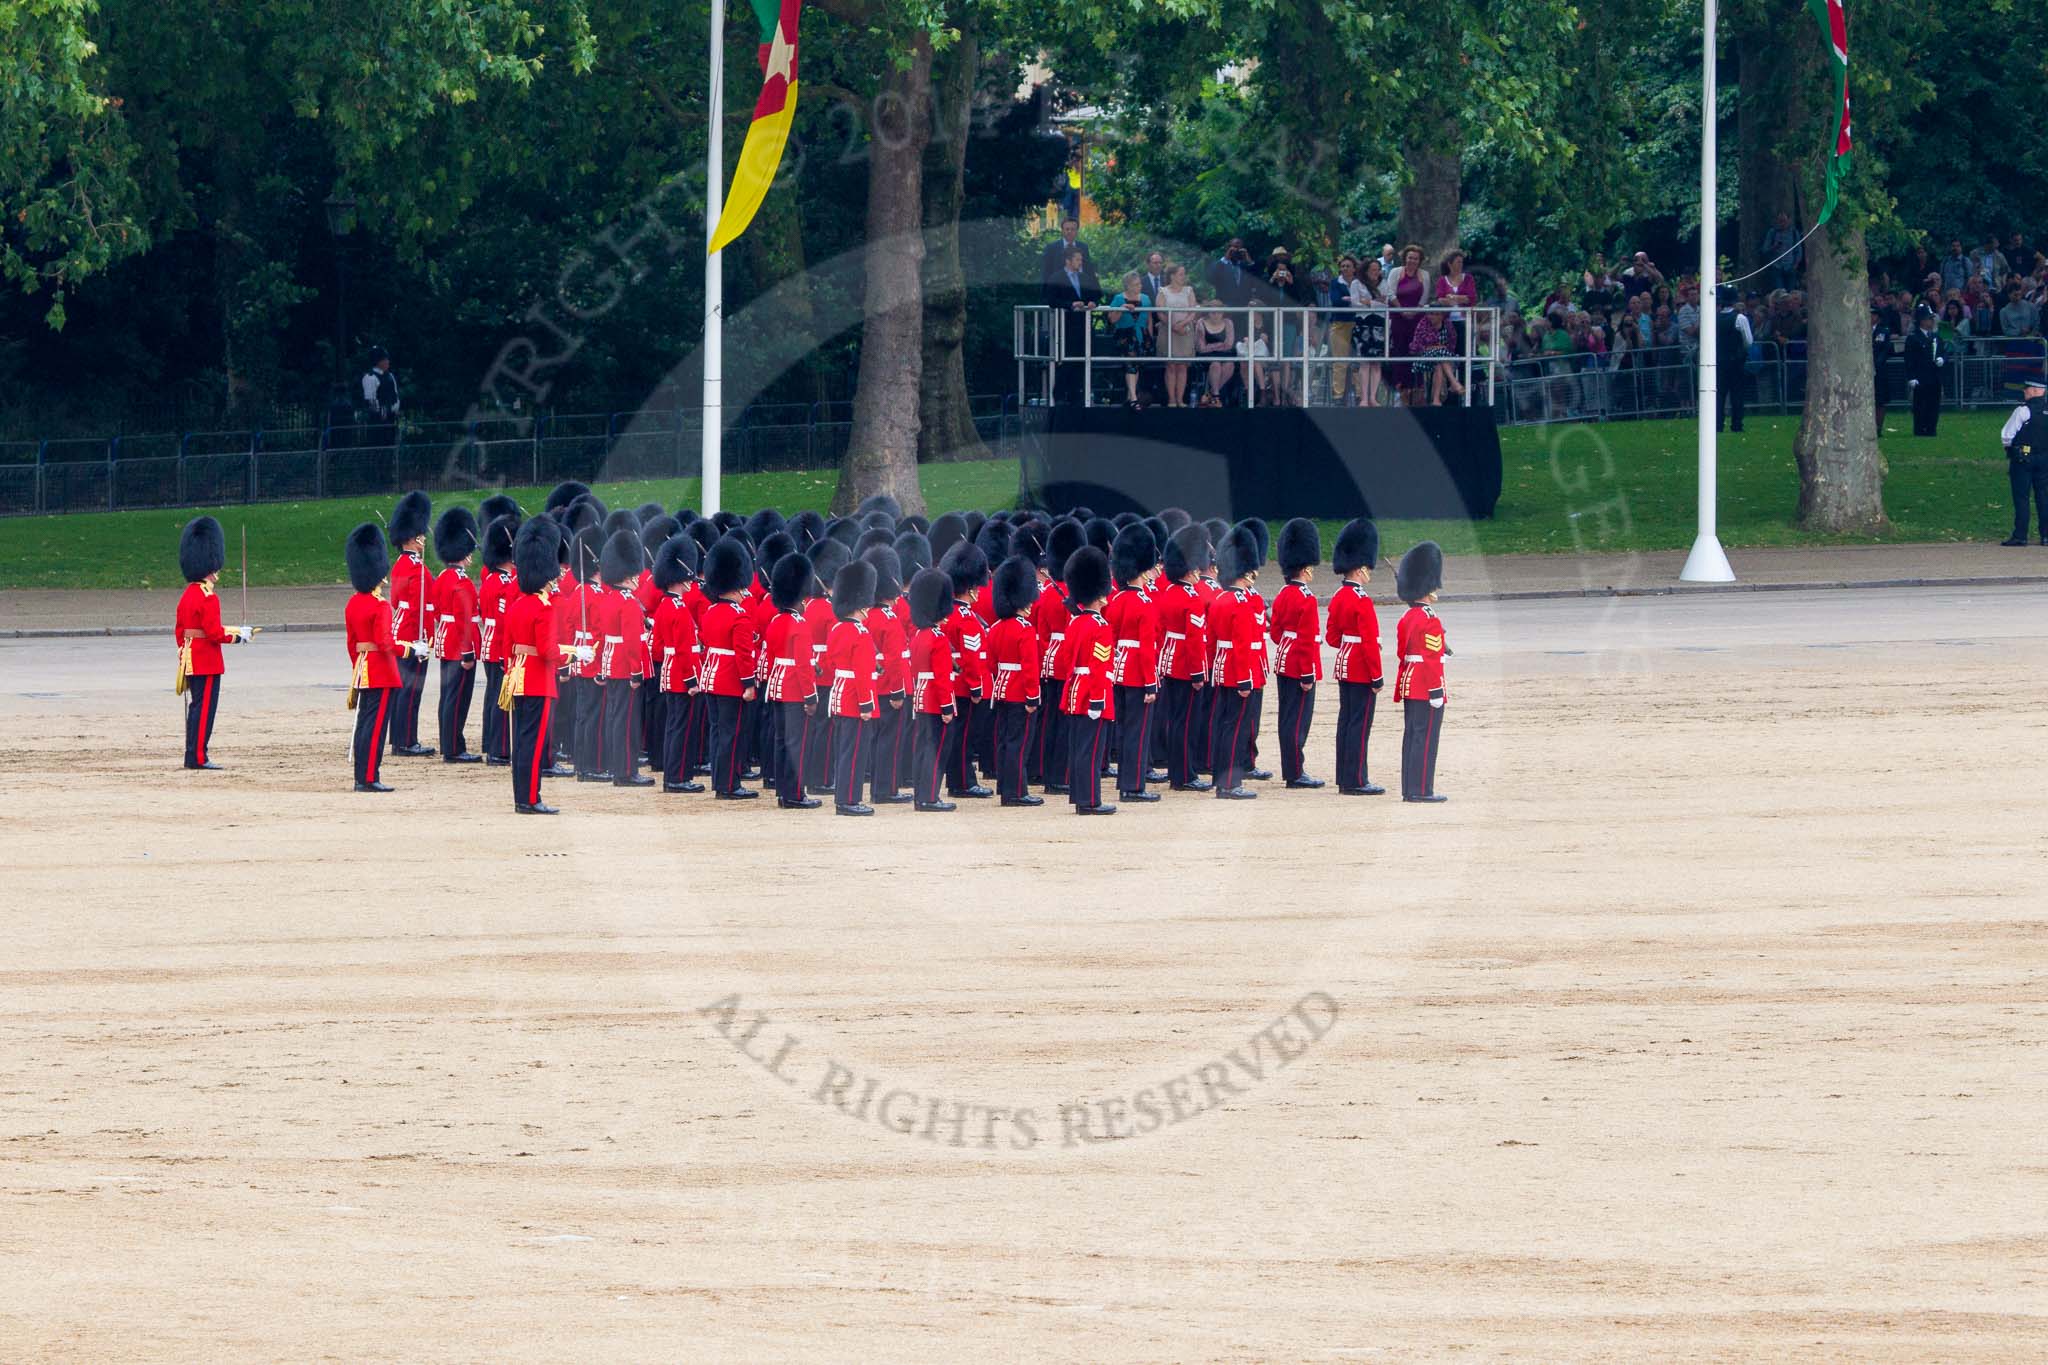 Trooping the Colour 2014.
Horse Guards Parade, Westminster,
London SW1A,

United Kingdom,
on 14 June 2014 at 12:07, image #868